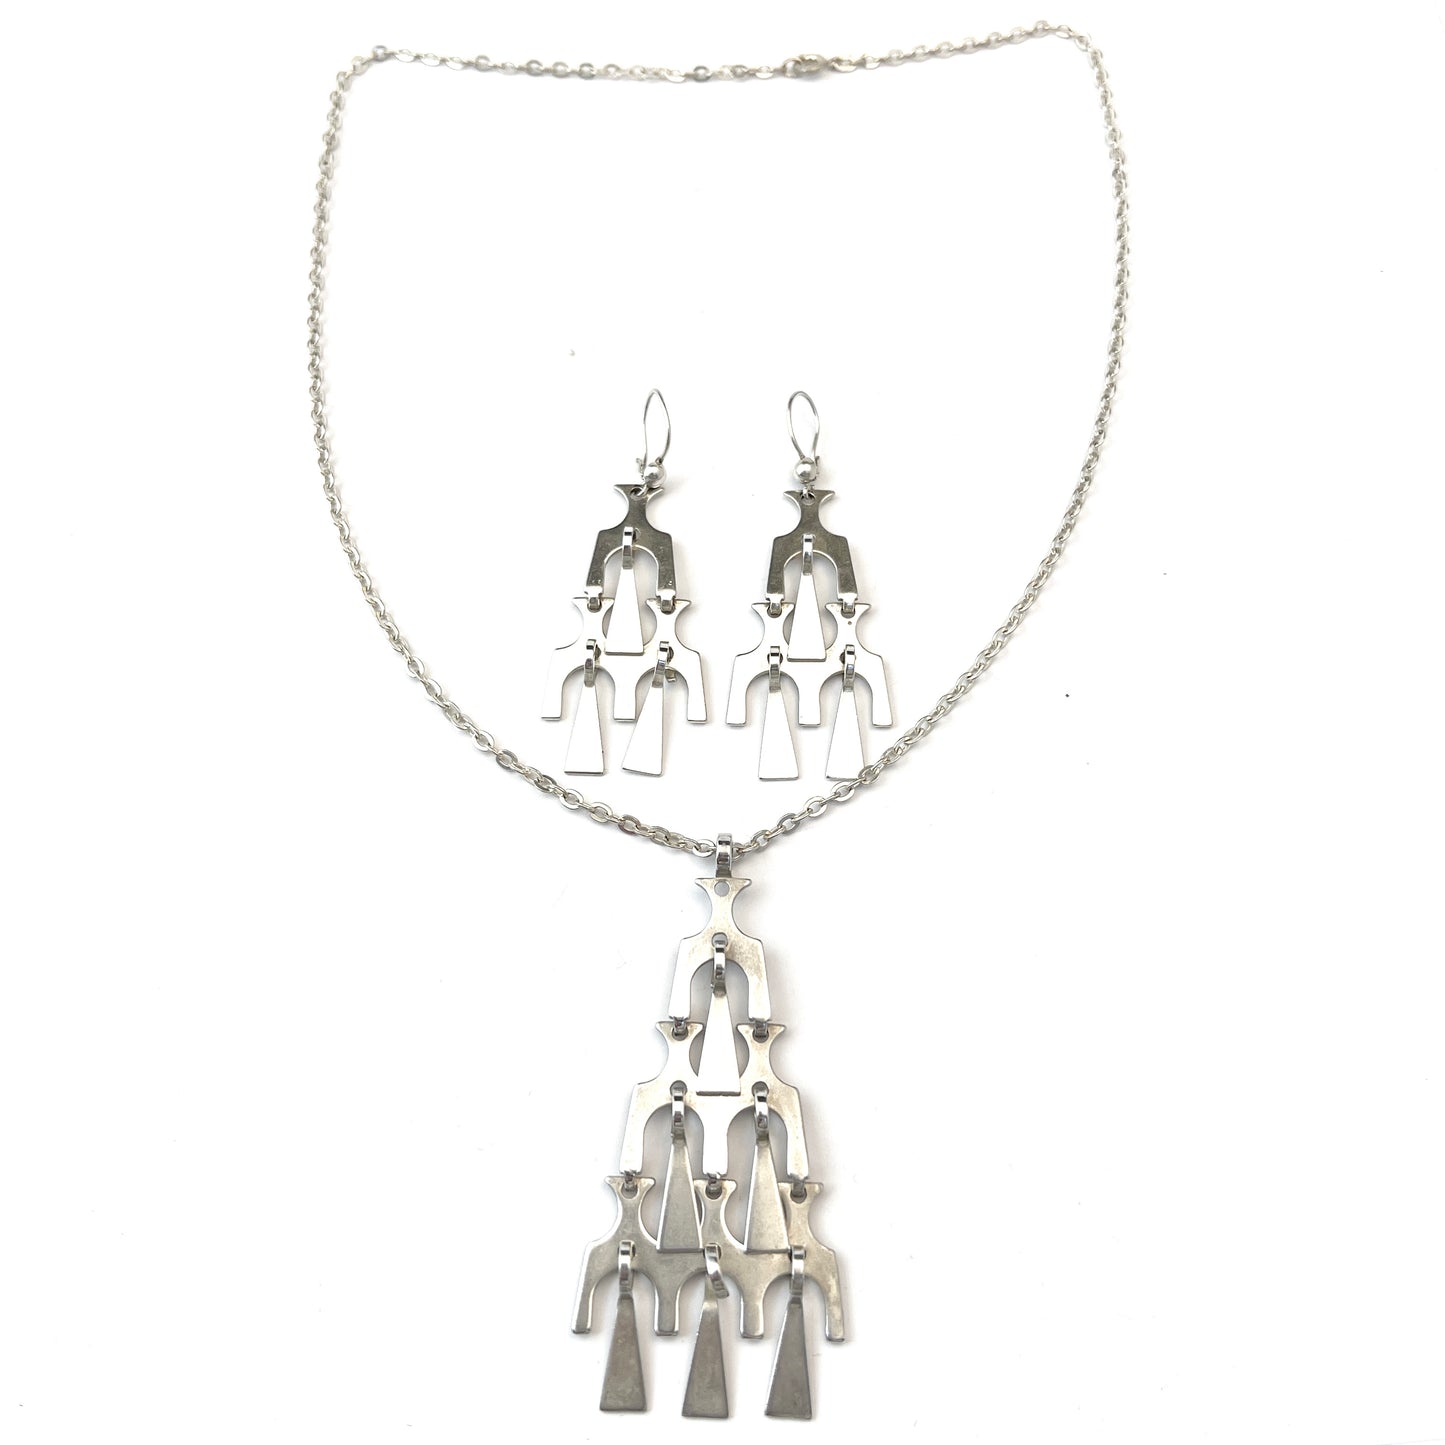 David-Andersen, Norway 1960s. Vintage Sterling Silver Earrings and Pendant Necklace.